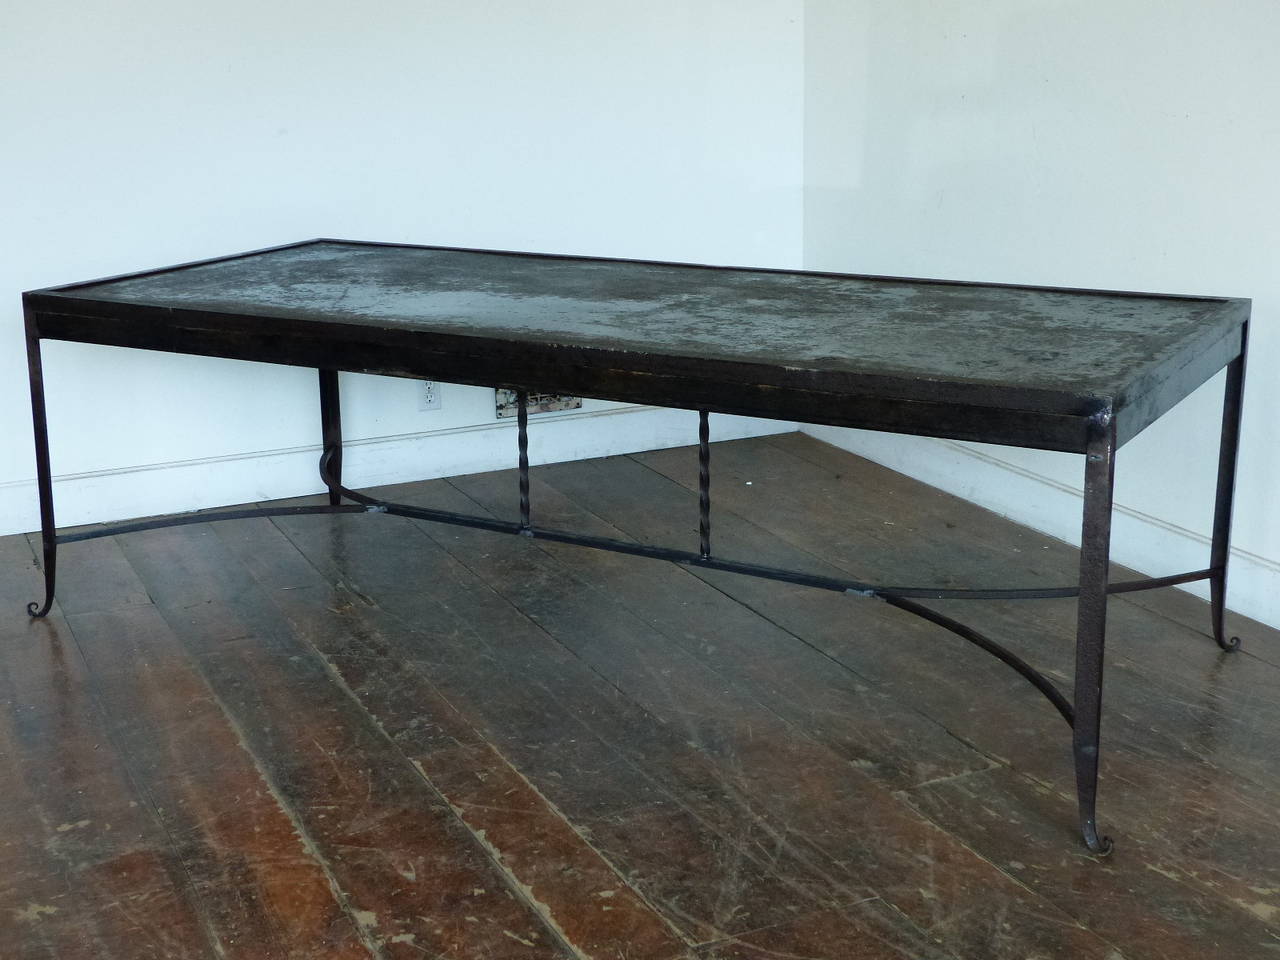 Great handmade french outdoor iron table  with hammered forged feet  and old rusty sealed finish.
Can be used indoor or outdoor. 96x 40